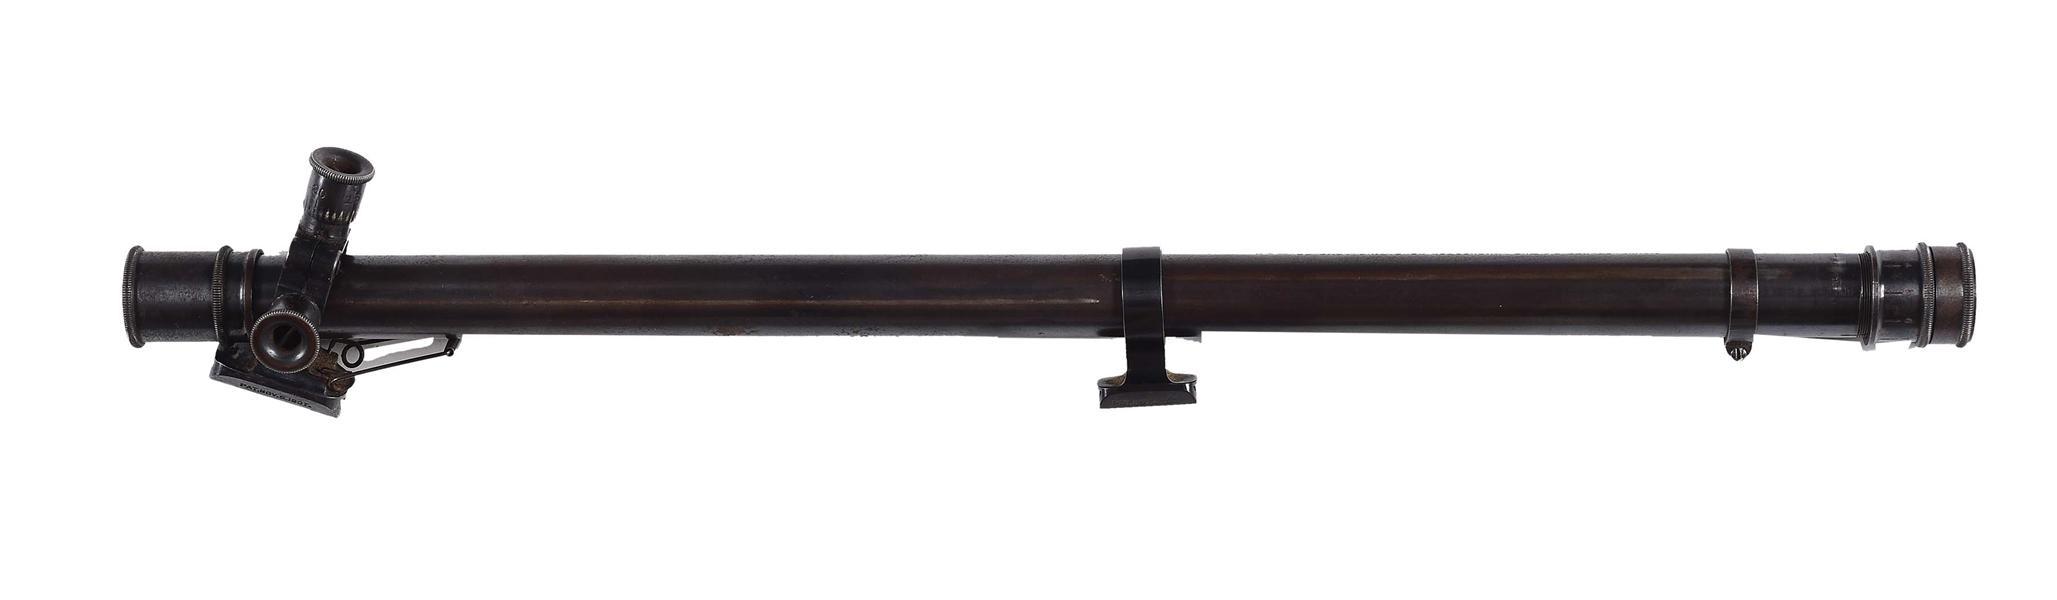 ORIGINAL WINCHESTER A-5 SCOPE AND MOUNTS.